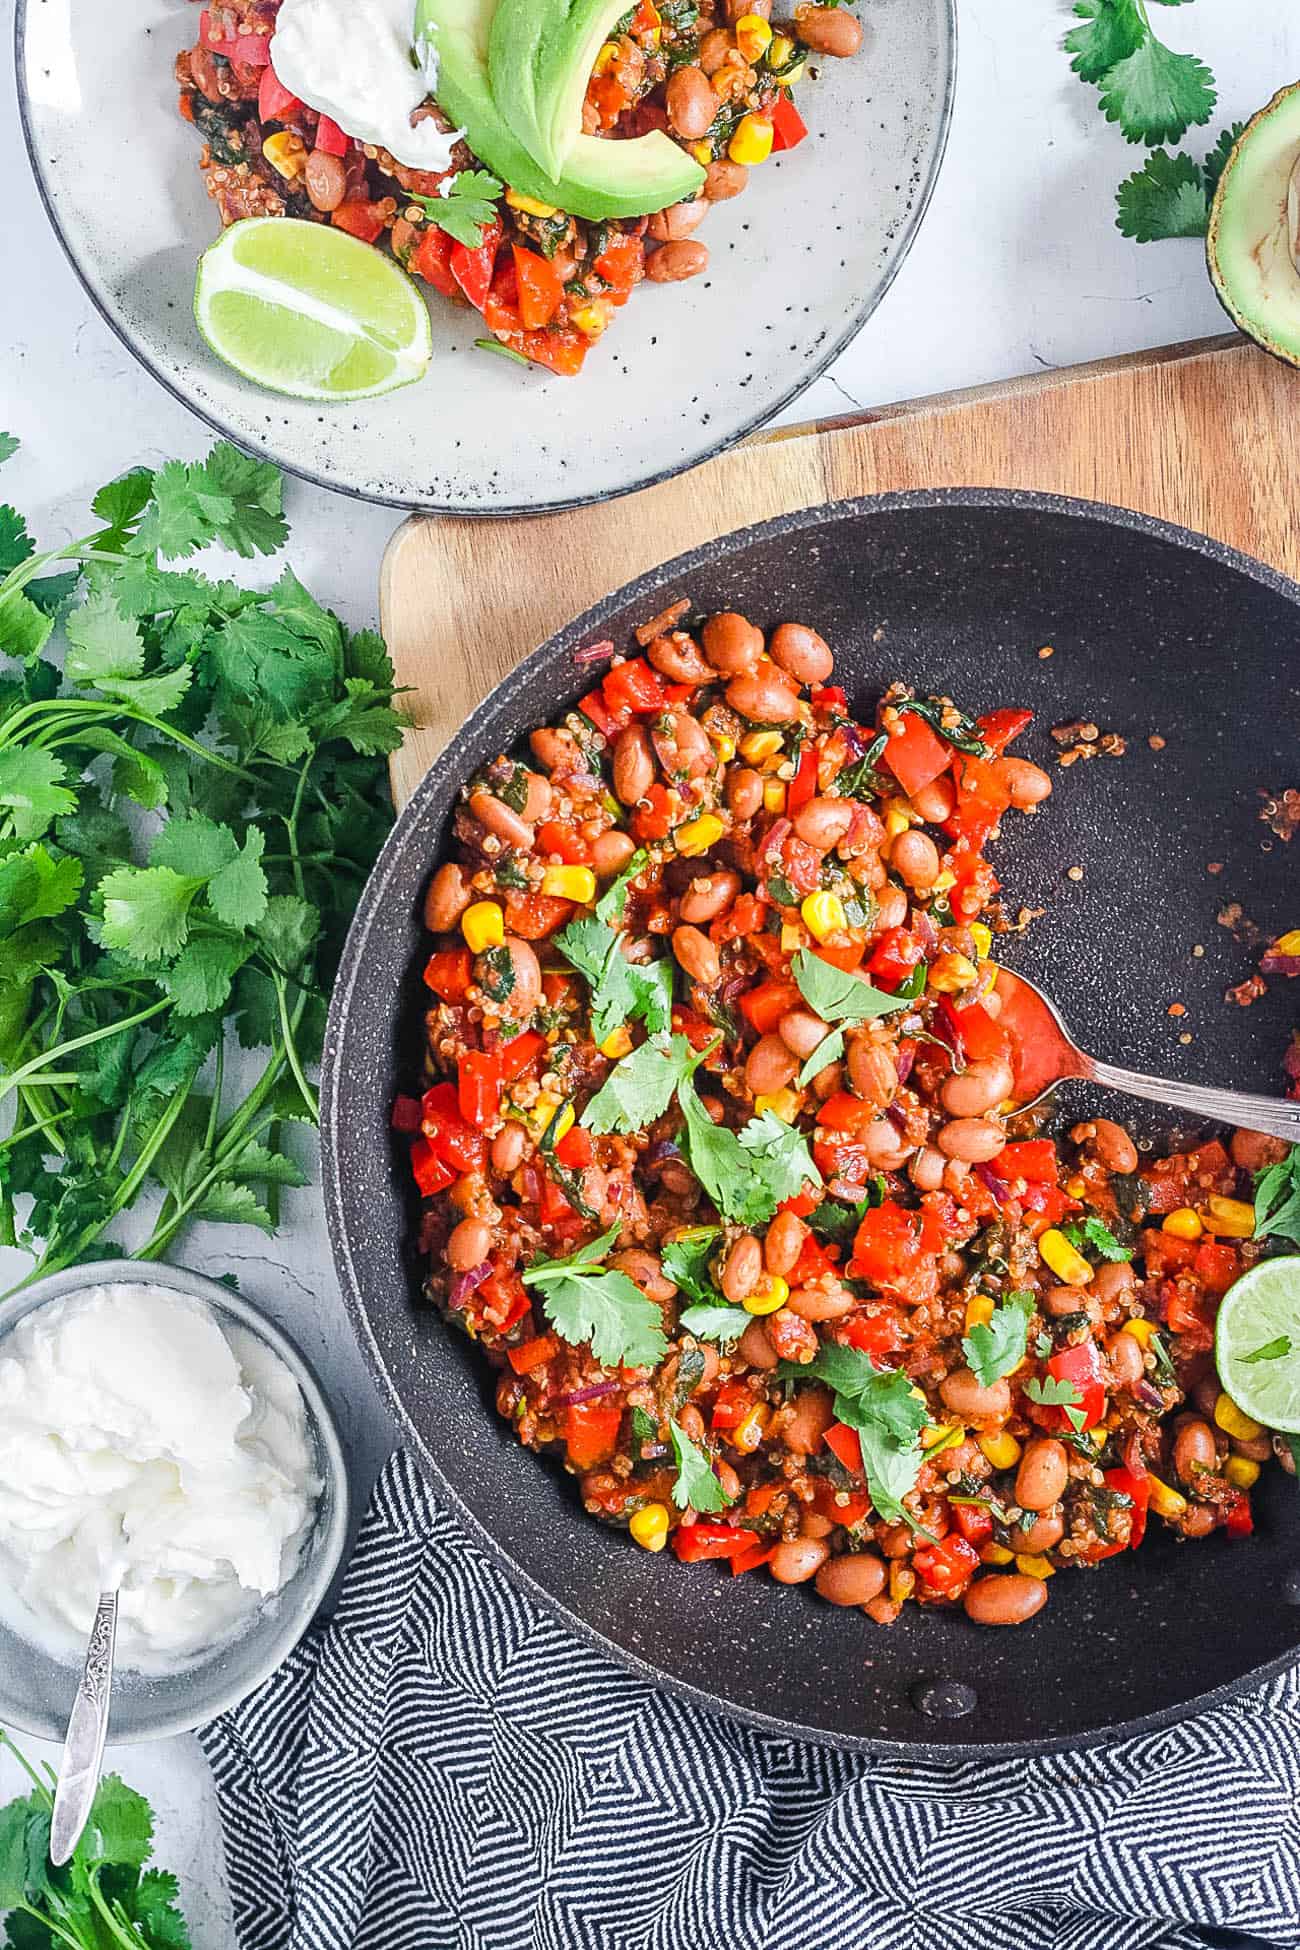 A skillet full of beans and vegetables on a wooden board.